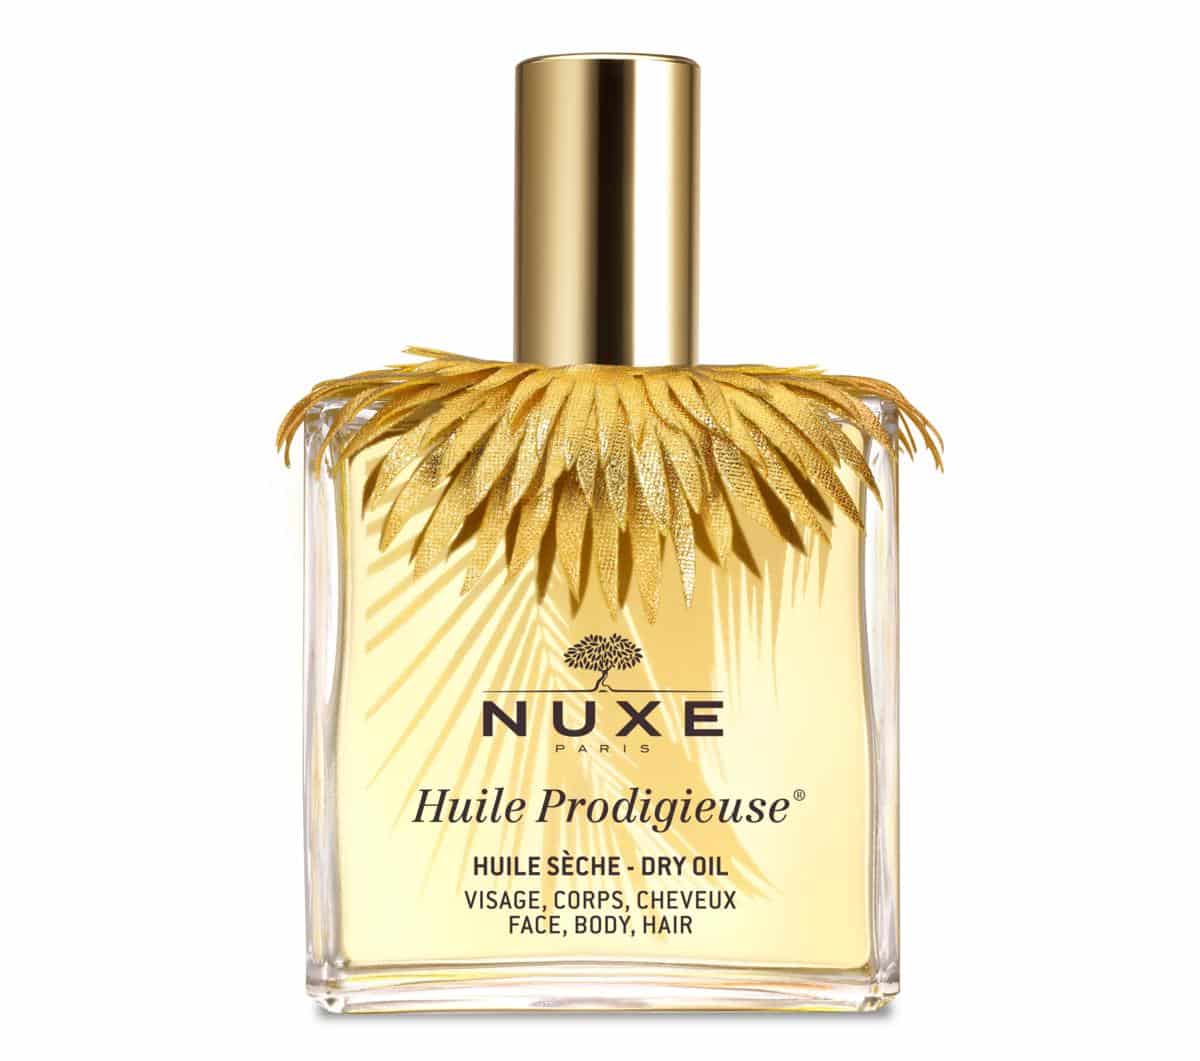 Nuxe Huile Prodigieuse Limited Edition*